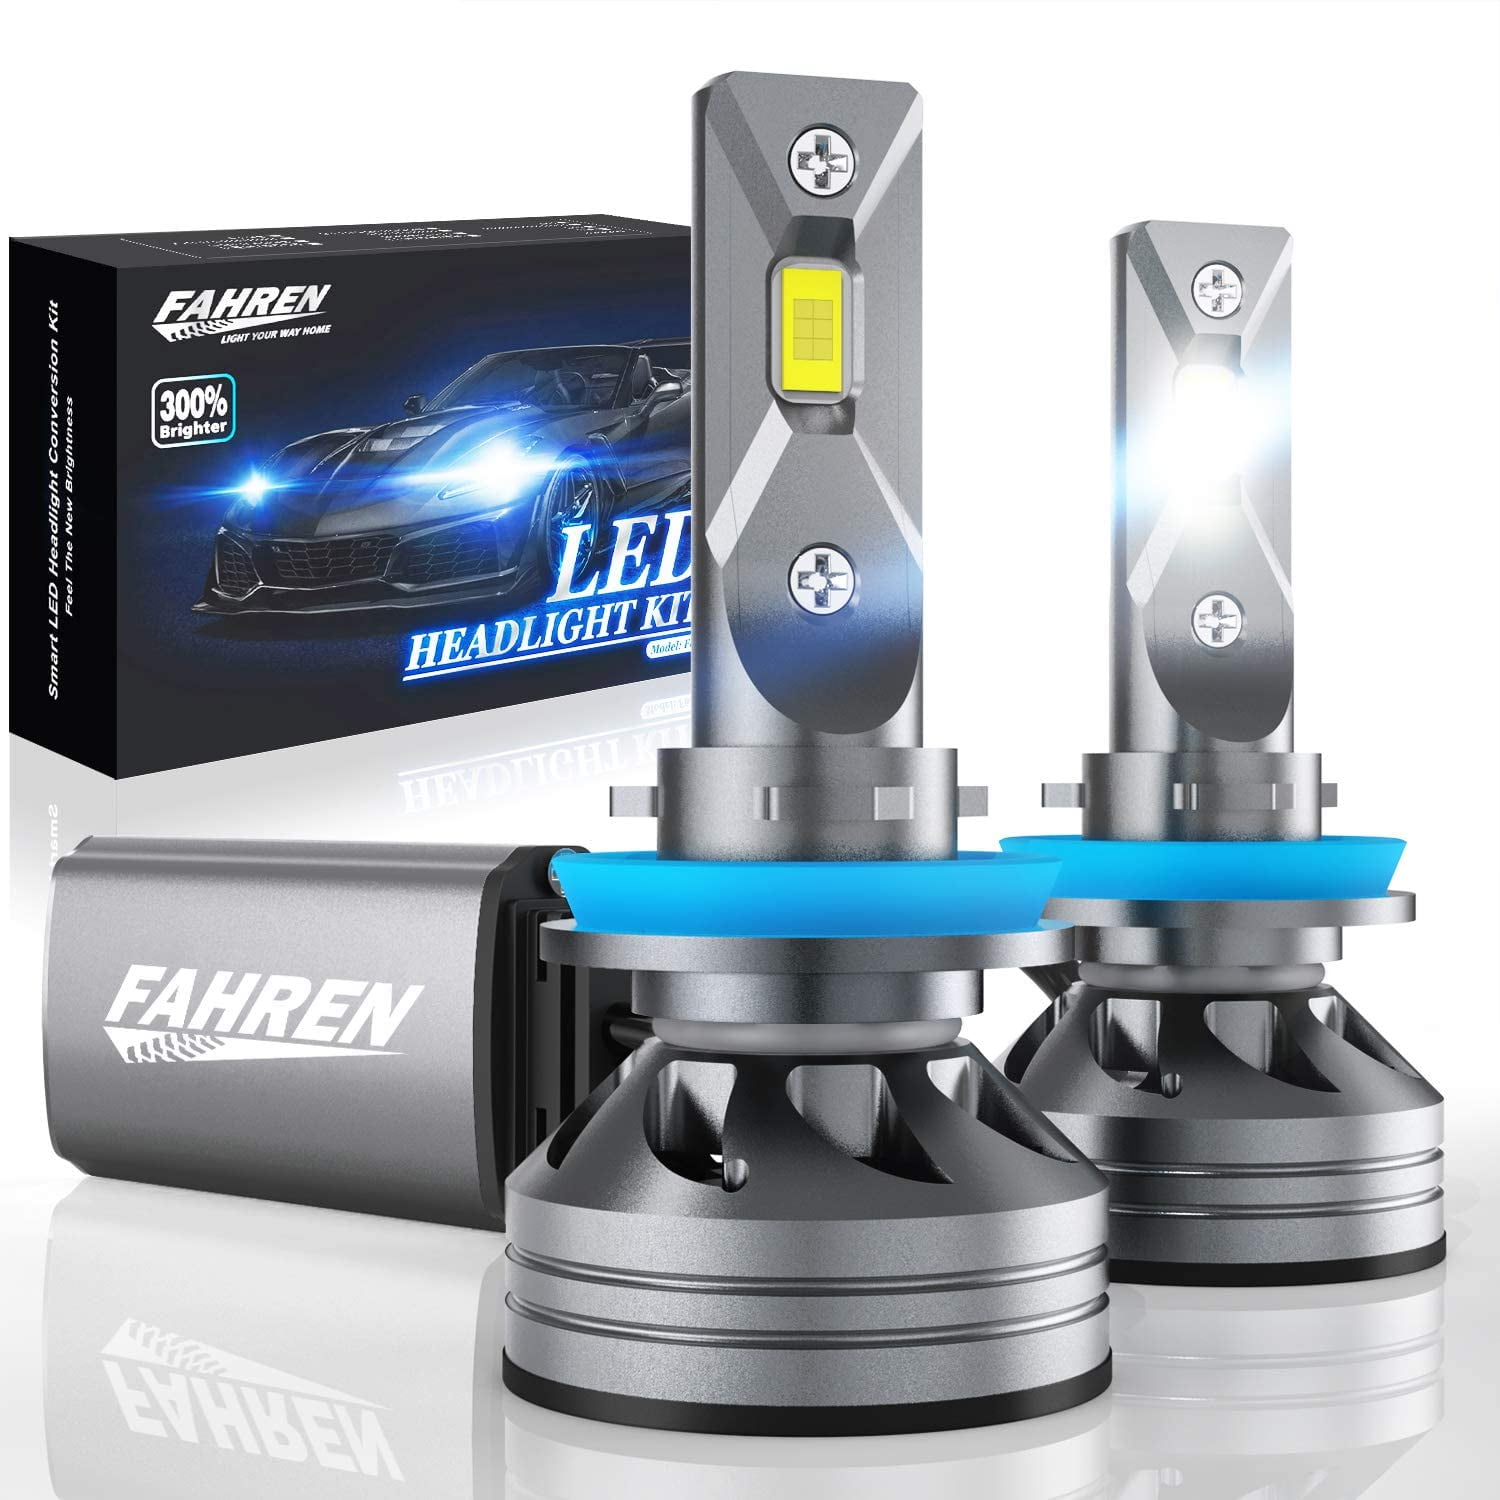 Friday Beneficiary output Fahren H11/H9/H8 LED Headlight Bulbs, 60W 10000 Lumens Super Bright LED  Headlights Conversion Kit 6500K Cool White IP68 Waterproof, Pack of 2 -  Walmart.com